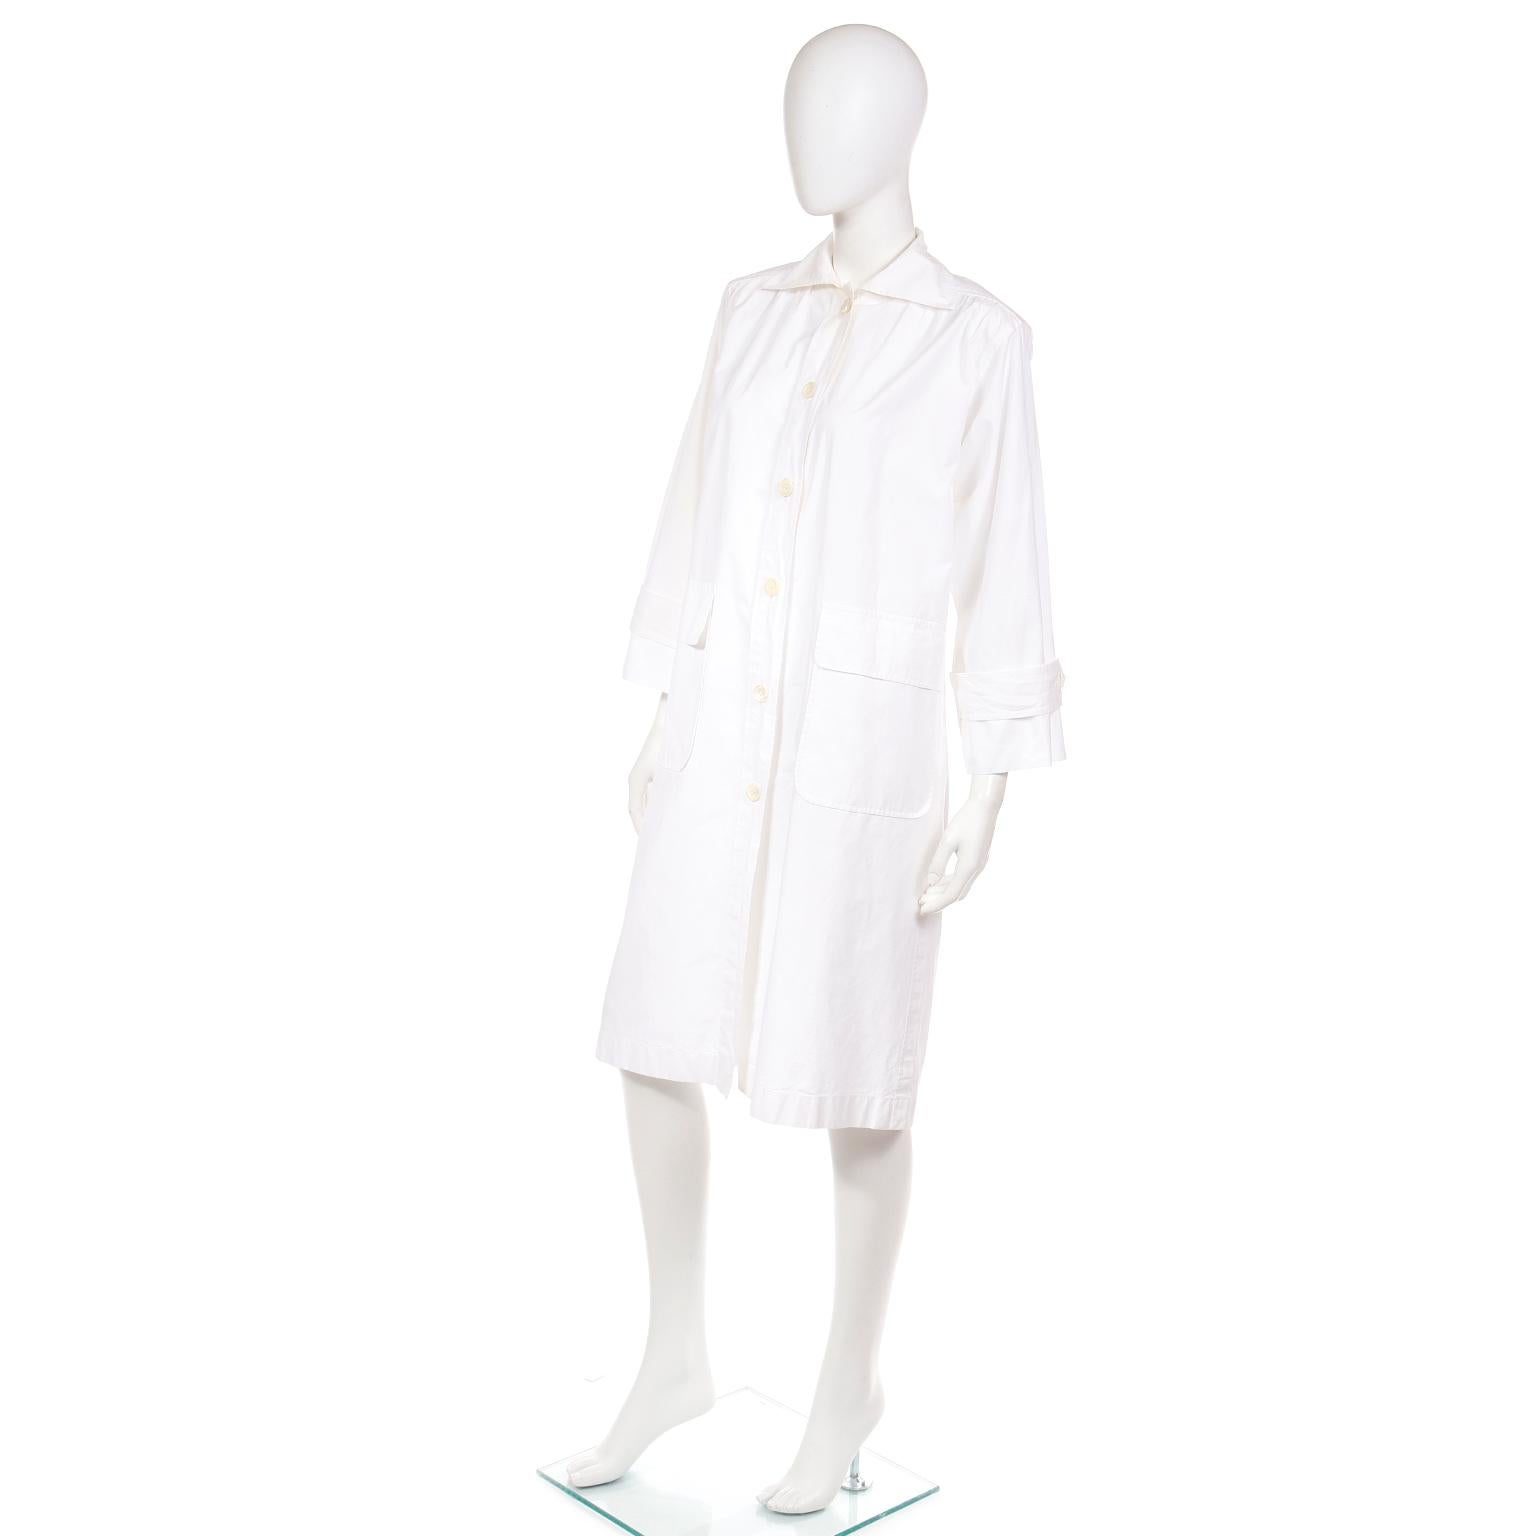 Vintage Yves Saint Laurent White Cotton Coat Dress or Duster Style Coat In Excellent Condition For Sale In Portland, OR